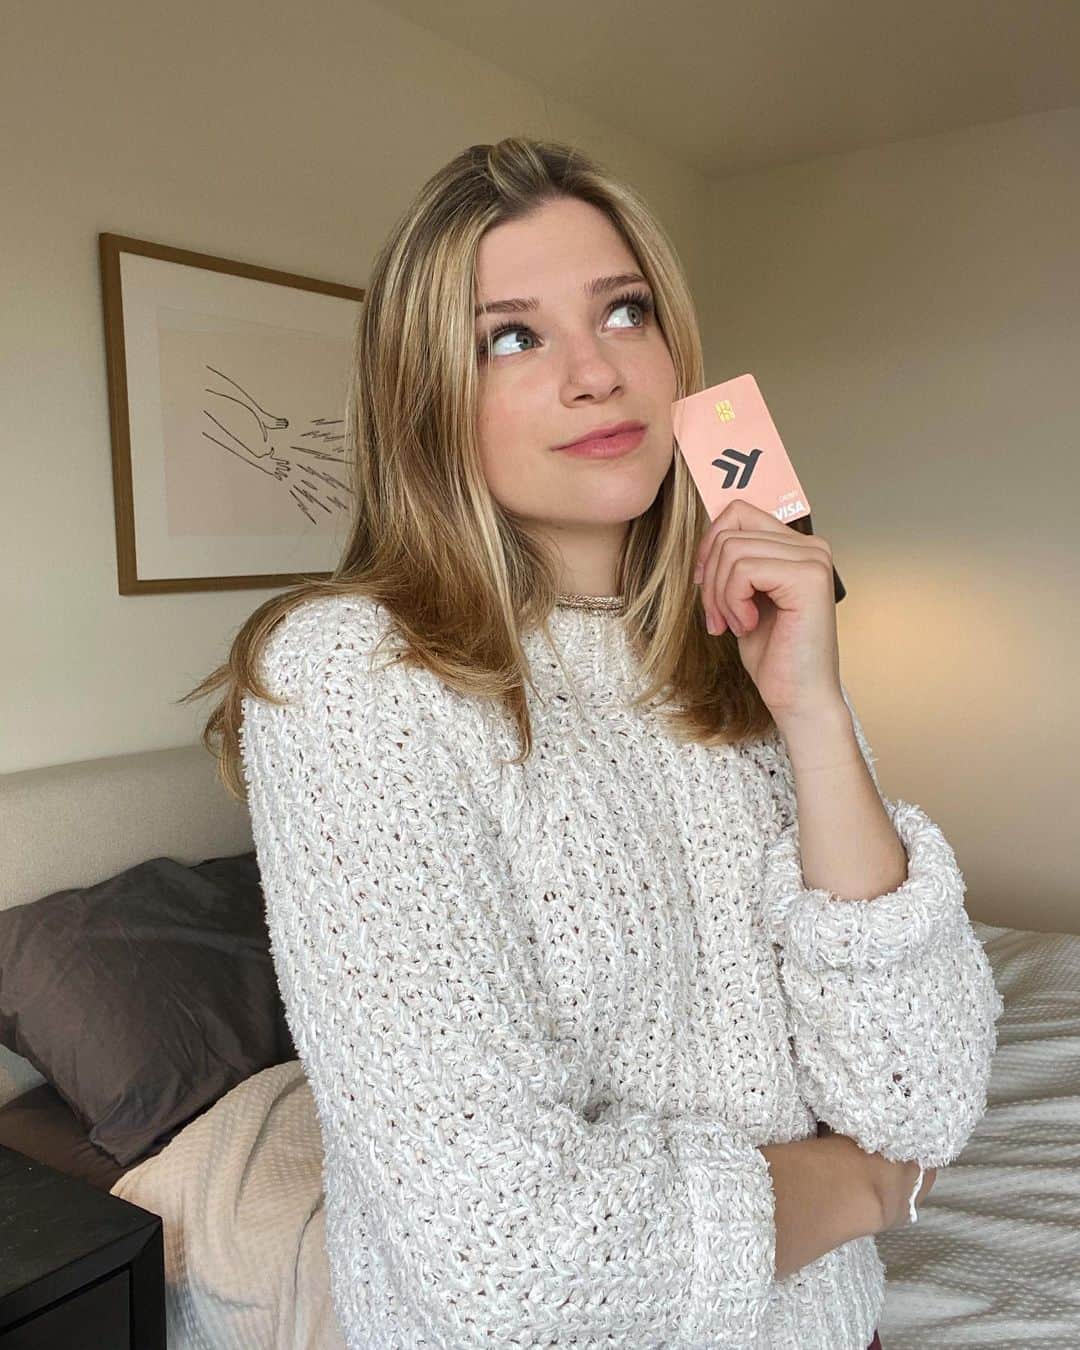 Monica Churchのインスタグラム：「#Ad Piggy bank? Don't know her! Times are changing, and so is the way we view our finances. I recently made the switch to @empowerbanking, an app that makes budgeting, spending, and saving your money a lot more transparent, and a lot less stressful! With their automated savings feature, I save extra cash every week, without having to think about it (like a piggy bank 😏). With Empower AutoSave, all you do is set a weekly savings target, and the app can detect when you have excess cash based on your income and spending patterns — and then it automatically sets aside that money for you in an AutoSave account (where you’re less likely to spend it!). The feature allows unlimited withdrawals and can be paused whenever you want.  To be honest, I was never the greatest with keeping track of my money before this. But now with Empower, I feel confident and in control of my saving, budgeting, and spending. Link in my bio to learn more! #KnowledgeIsPower  Banking services for new accounts provided by nbkc bank, Member FDIC.」